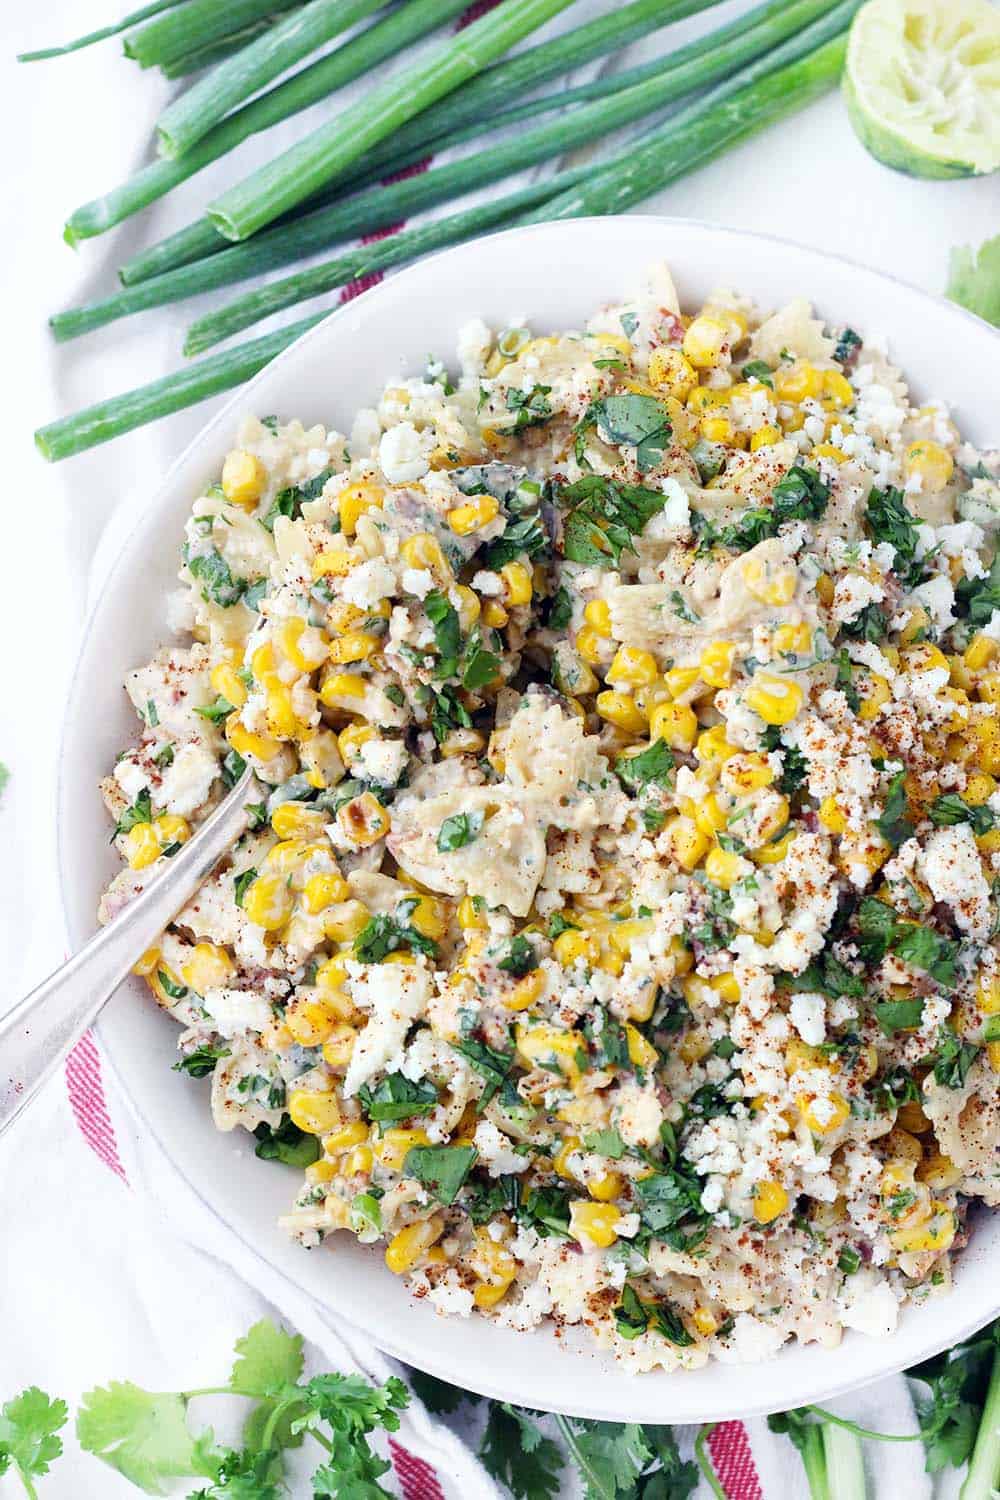 This Mexican Street Corn Pasta Salad is PACKED with sweet corn and tossed in a creamy chili lime dressing. With plenty of queso fresco, bacon, jalapeño, and green onions, this flavor-packed recipe is perfect for a potluck! Can be made with frozen, fresh, or canned corn. Plus, no grilling required! For extra smoky and charred flavor without grilling, the corn is sautéed in bacon fat.